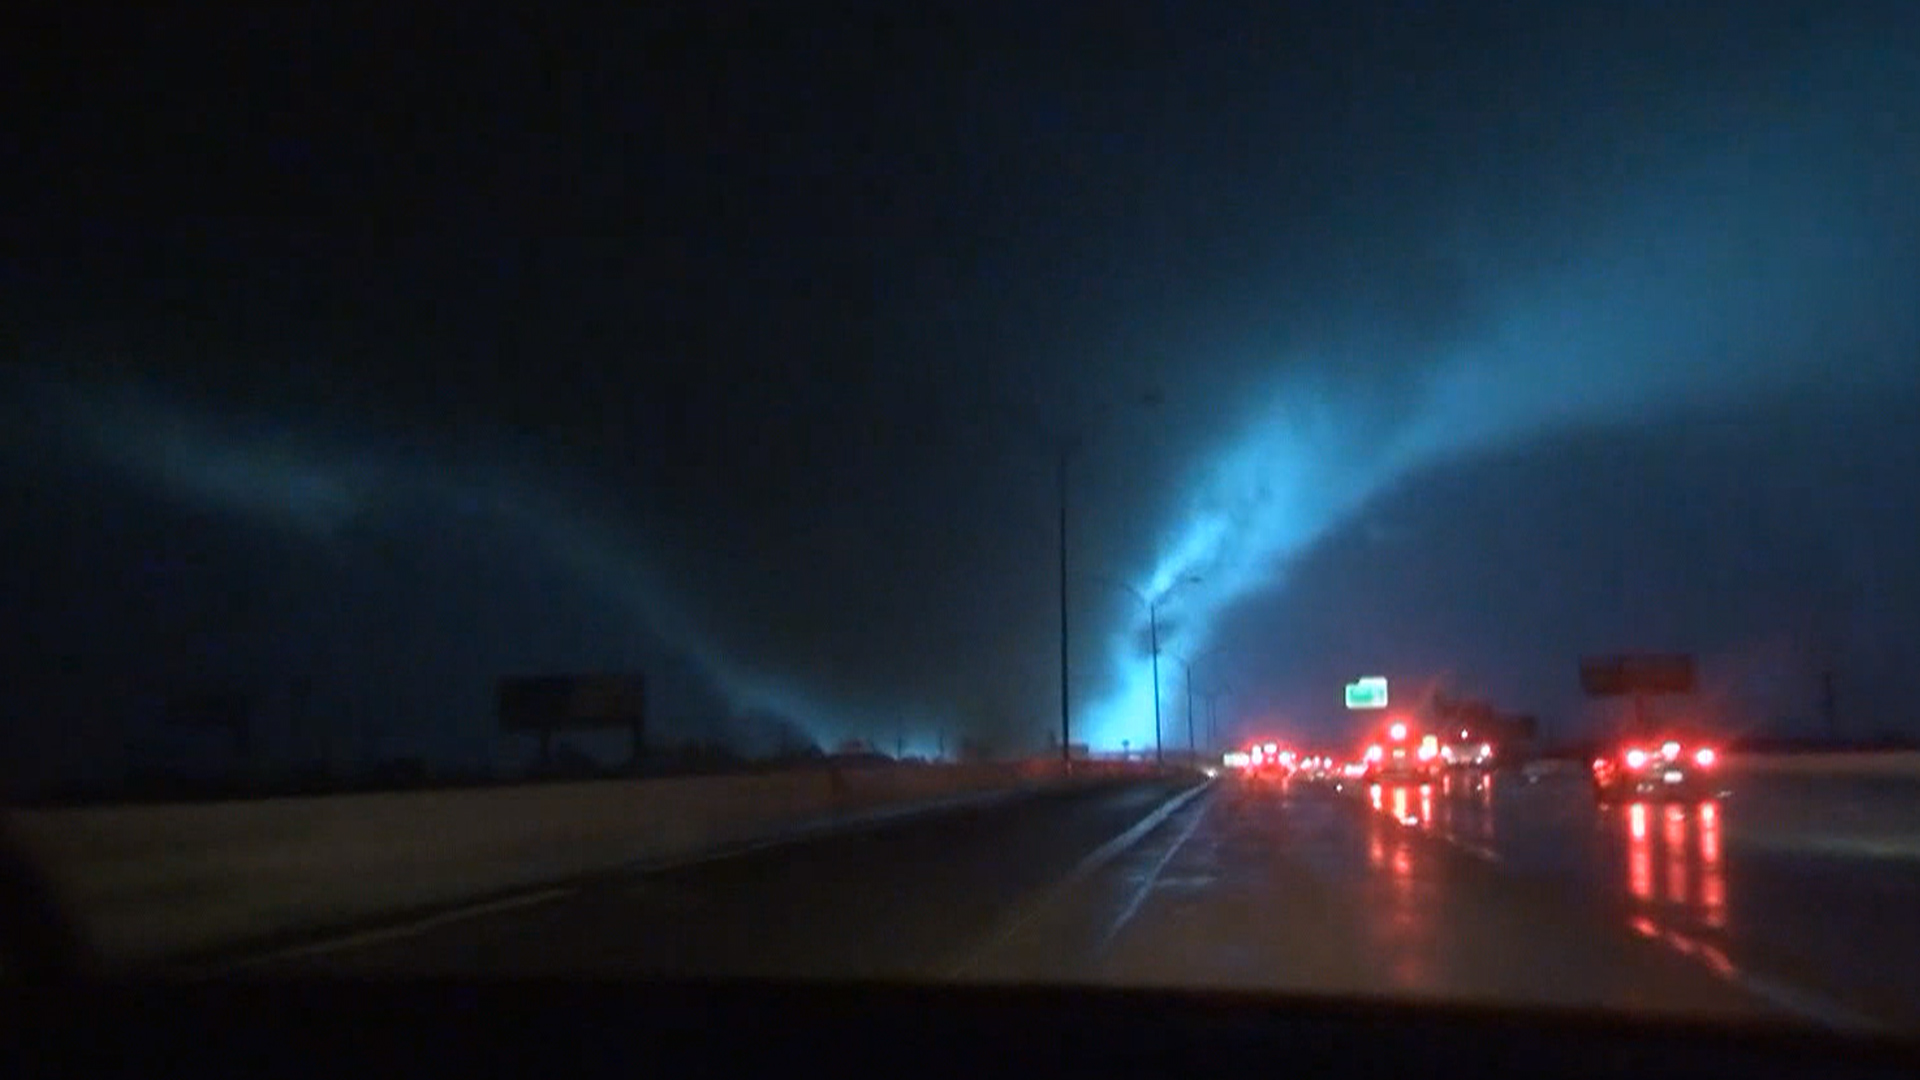 At least 8 dead as severe weather, tornadoes hit Dallas area - TODAY.com1920 x 1080